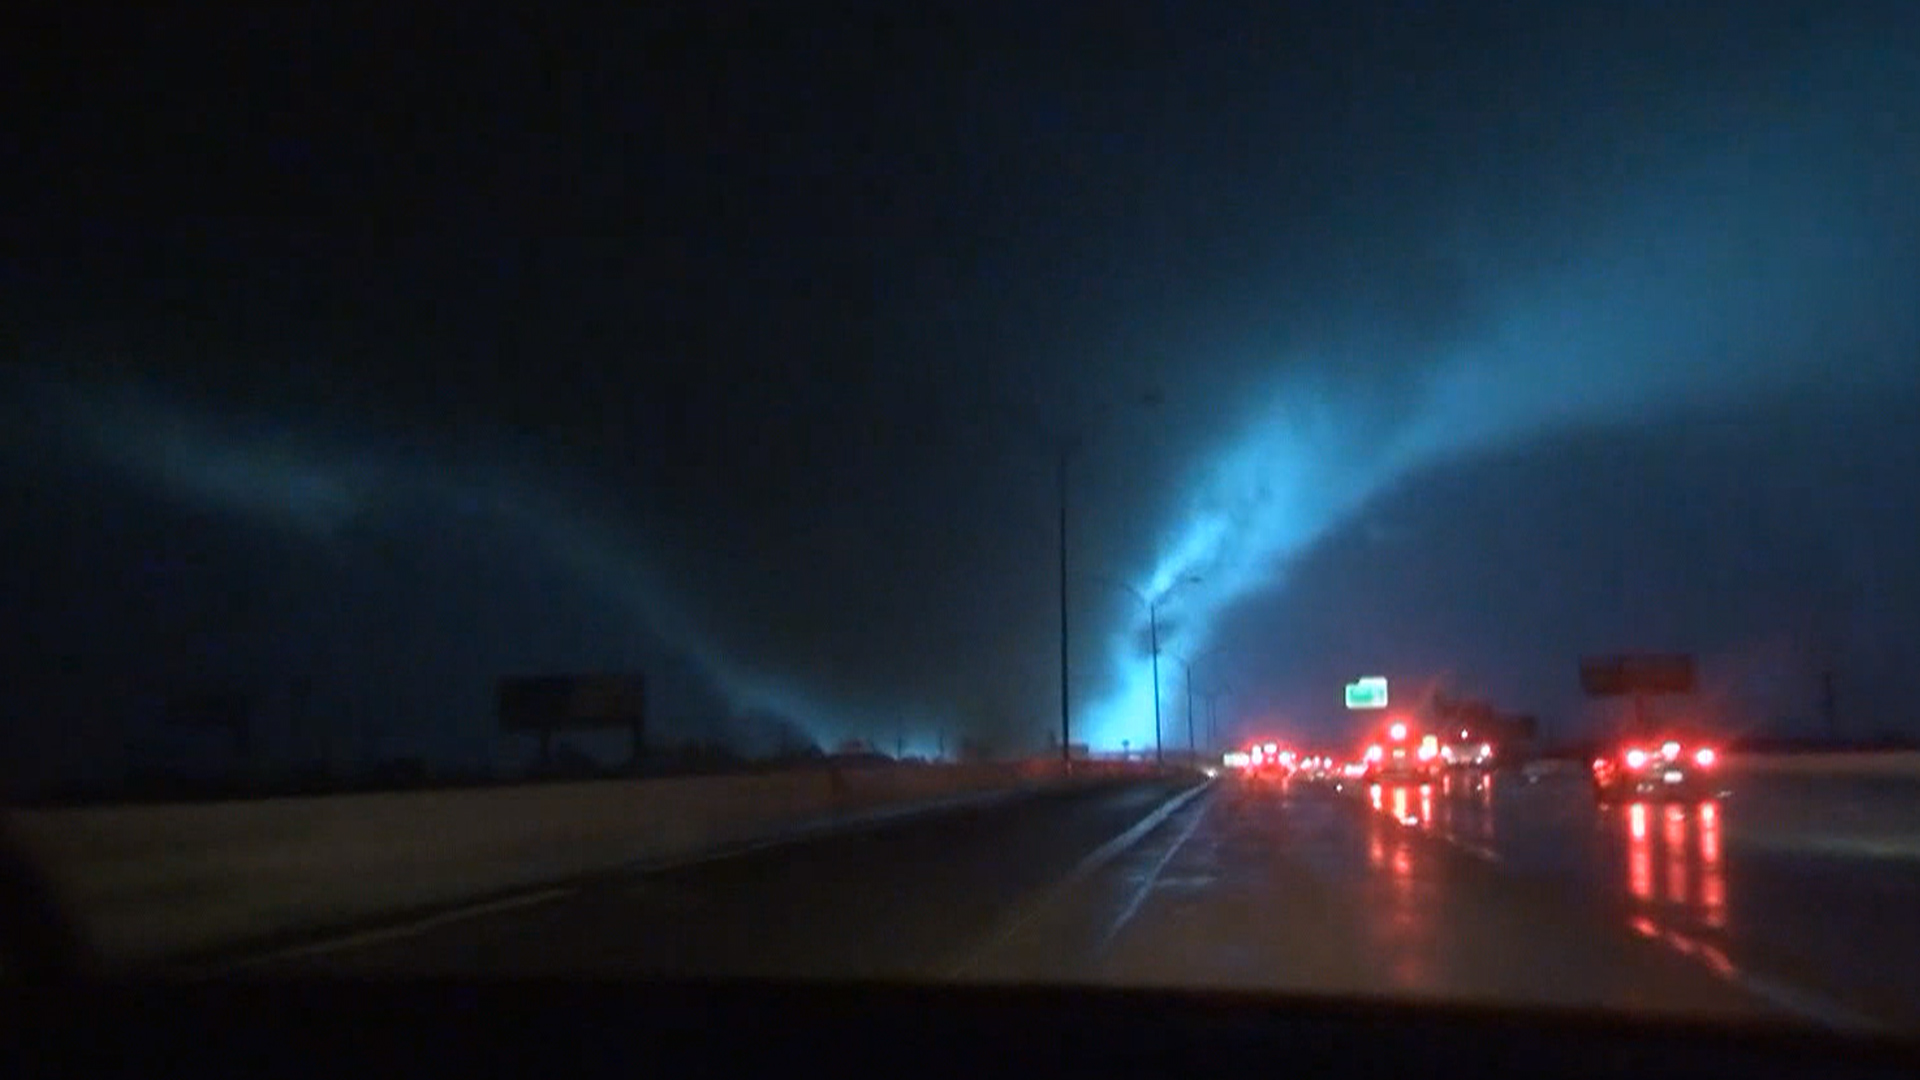 At least 8 dead as severe weather, tornadoes hit Dallas area - TODAY.com1920 x 1080